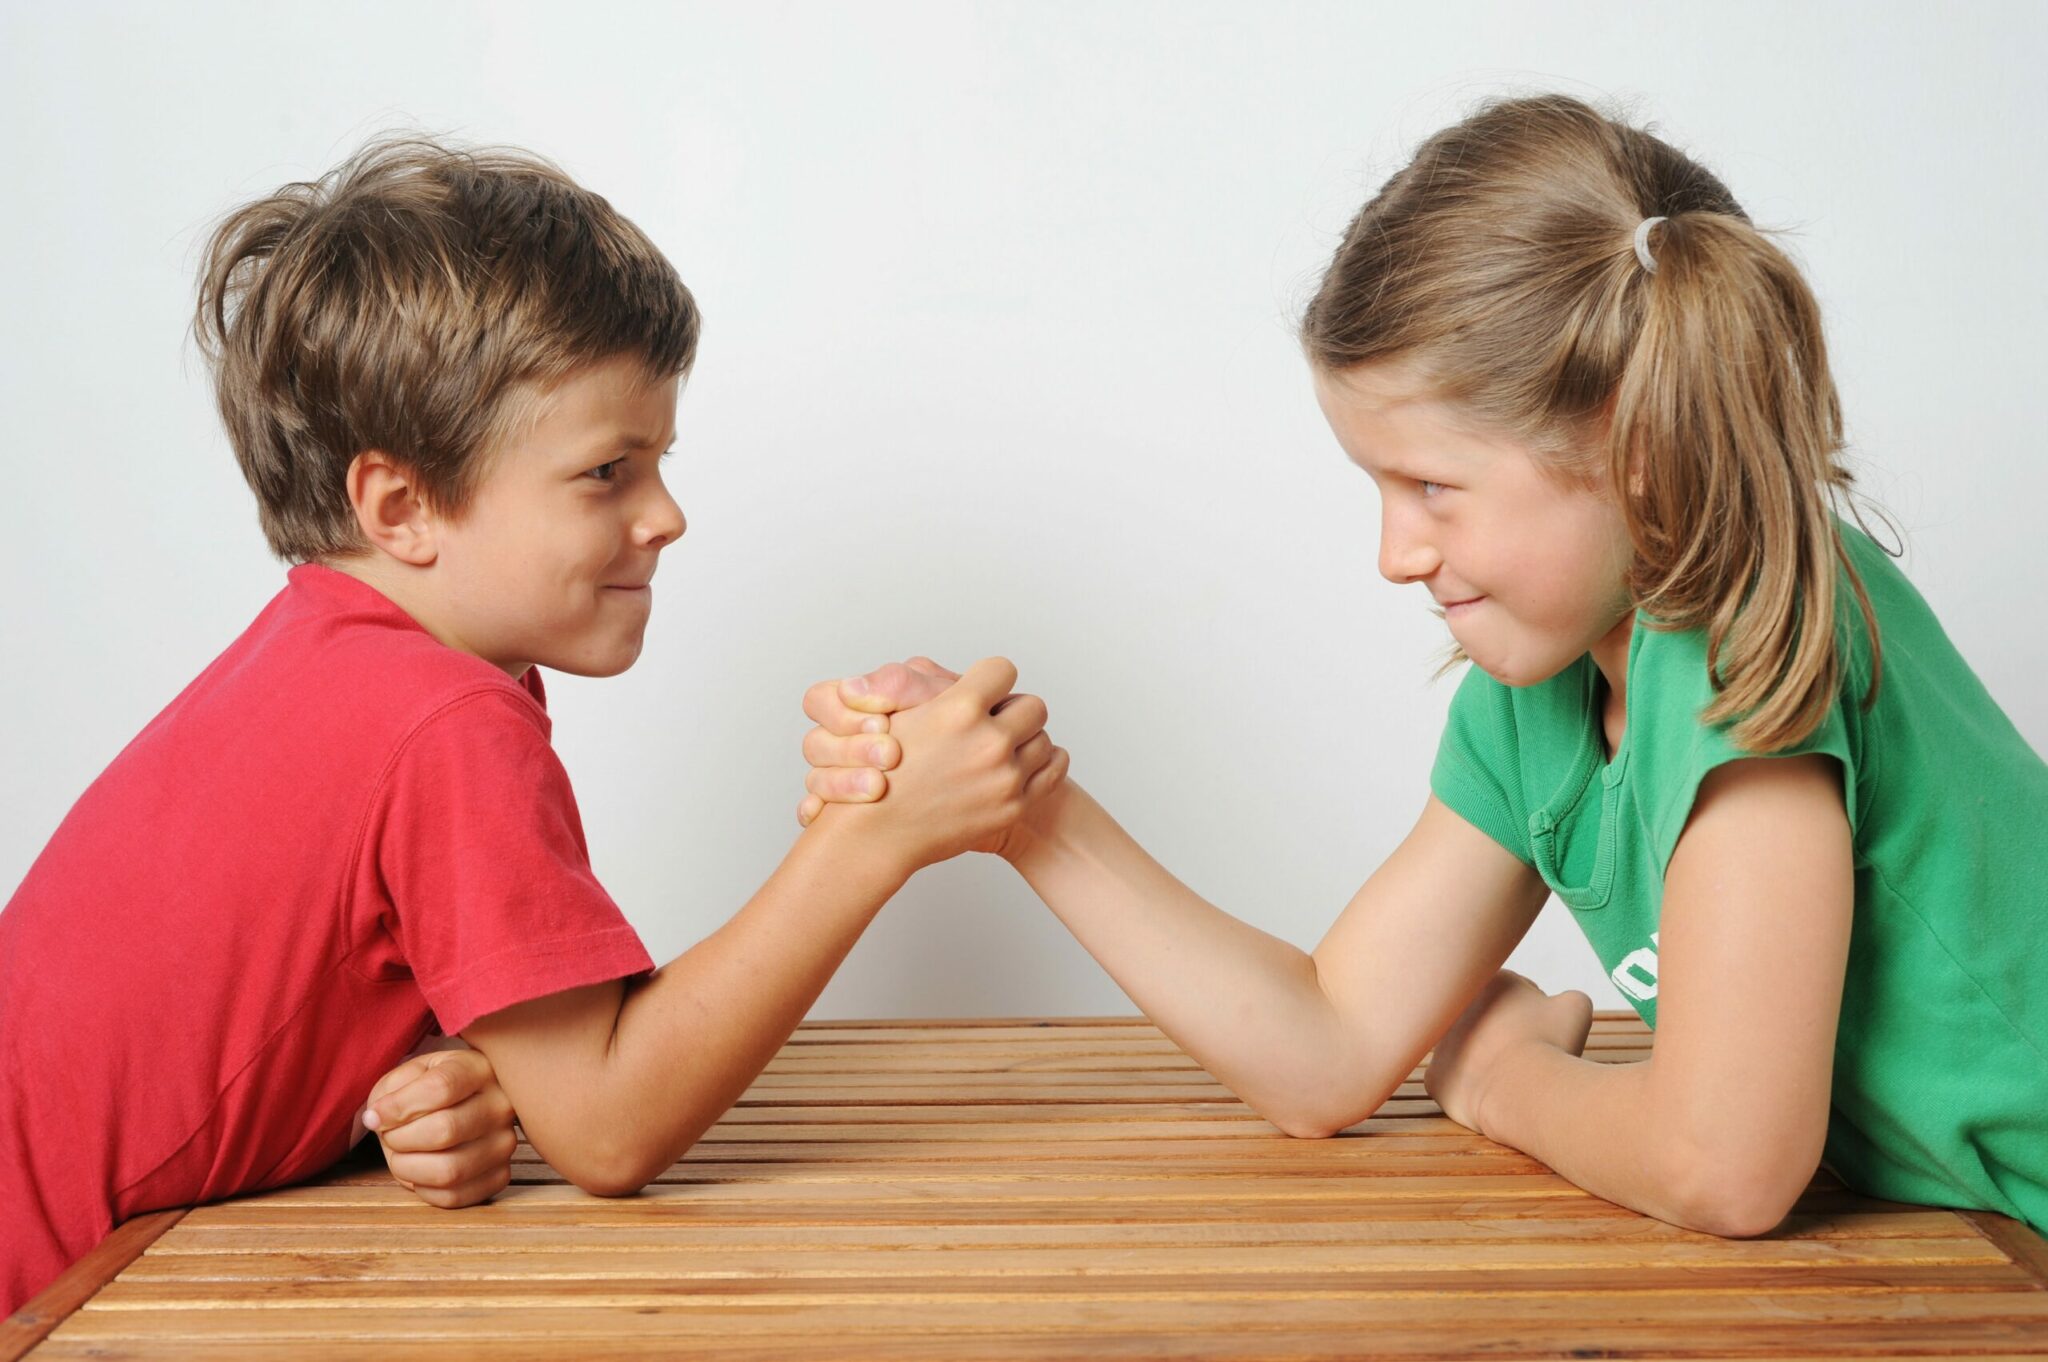 Two kids, a boy and a girl, engaged in a heated argument at a table.